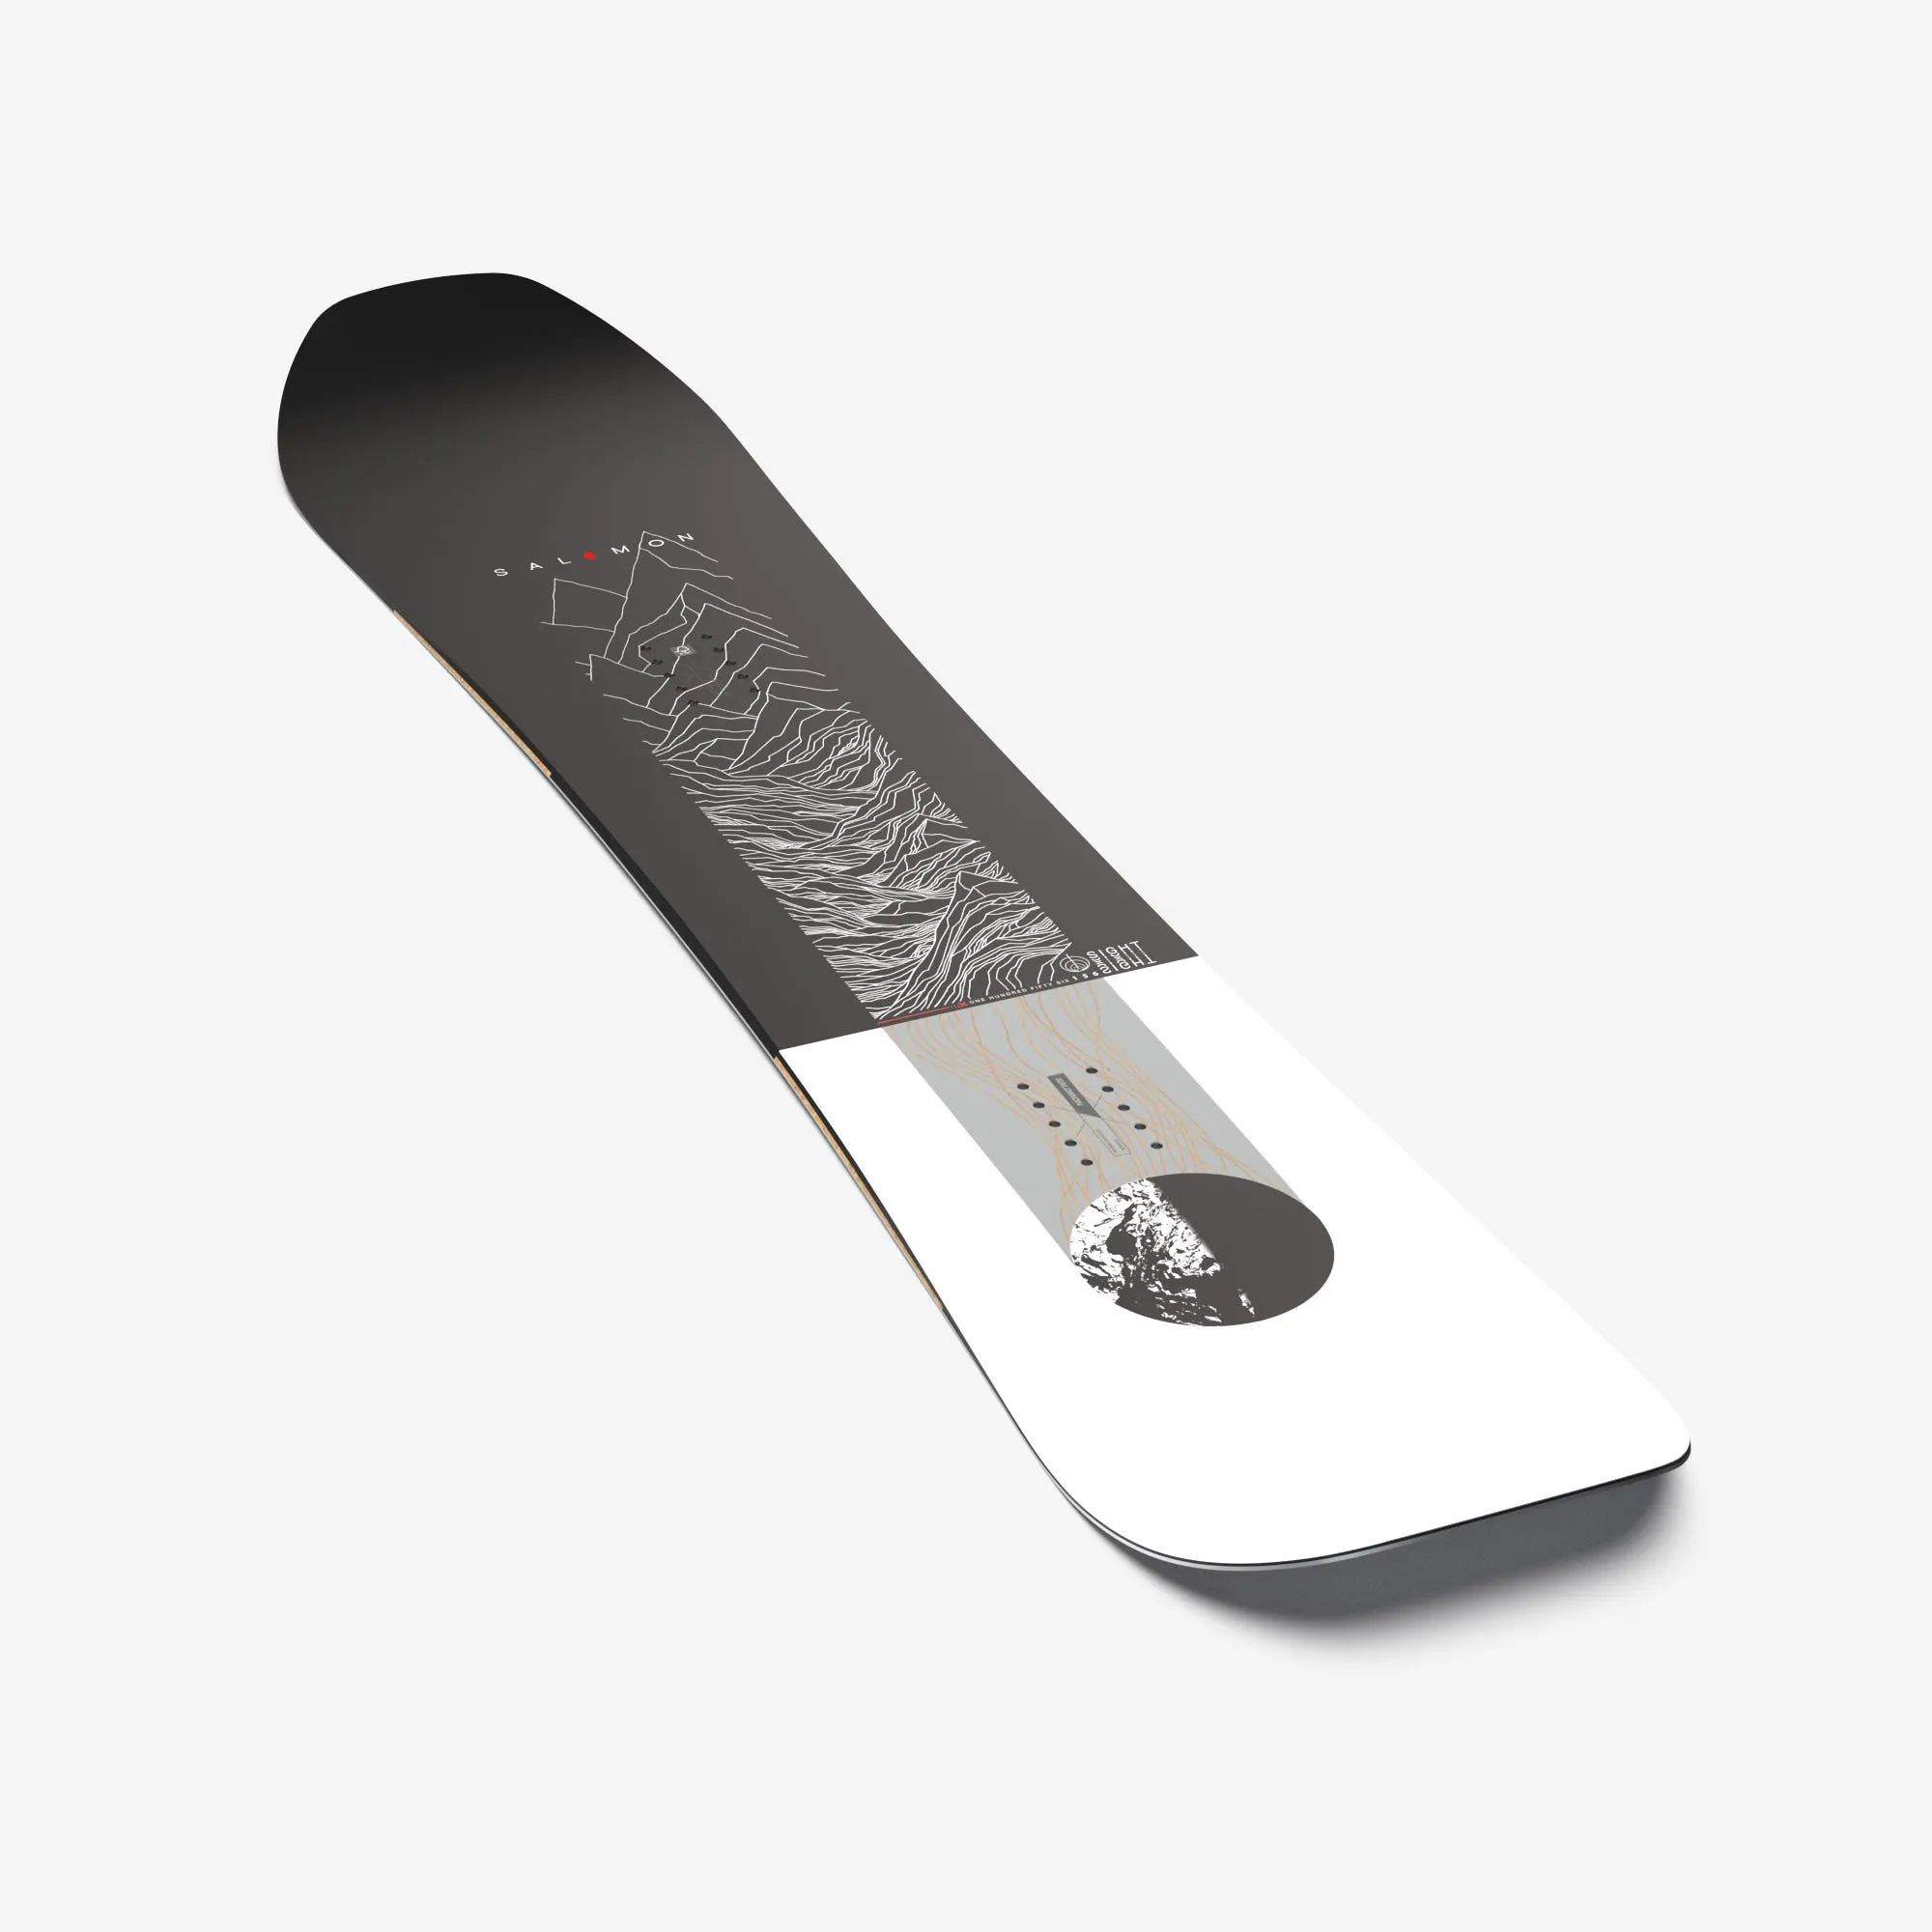 The Sight is an all-mountain snowboard with a freeride inspired shape. A tapered directional shape enhances turning sensation and float, with Cross Profile camber for stability on groomers. Using eco-friendly cork rails the Sight makes hard pack feel like butter while reducing the impact on the planet.